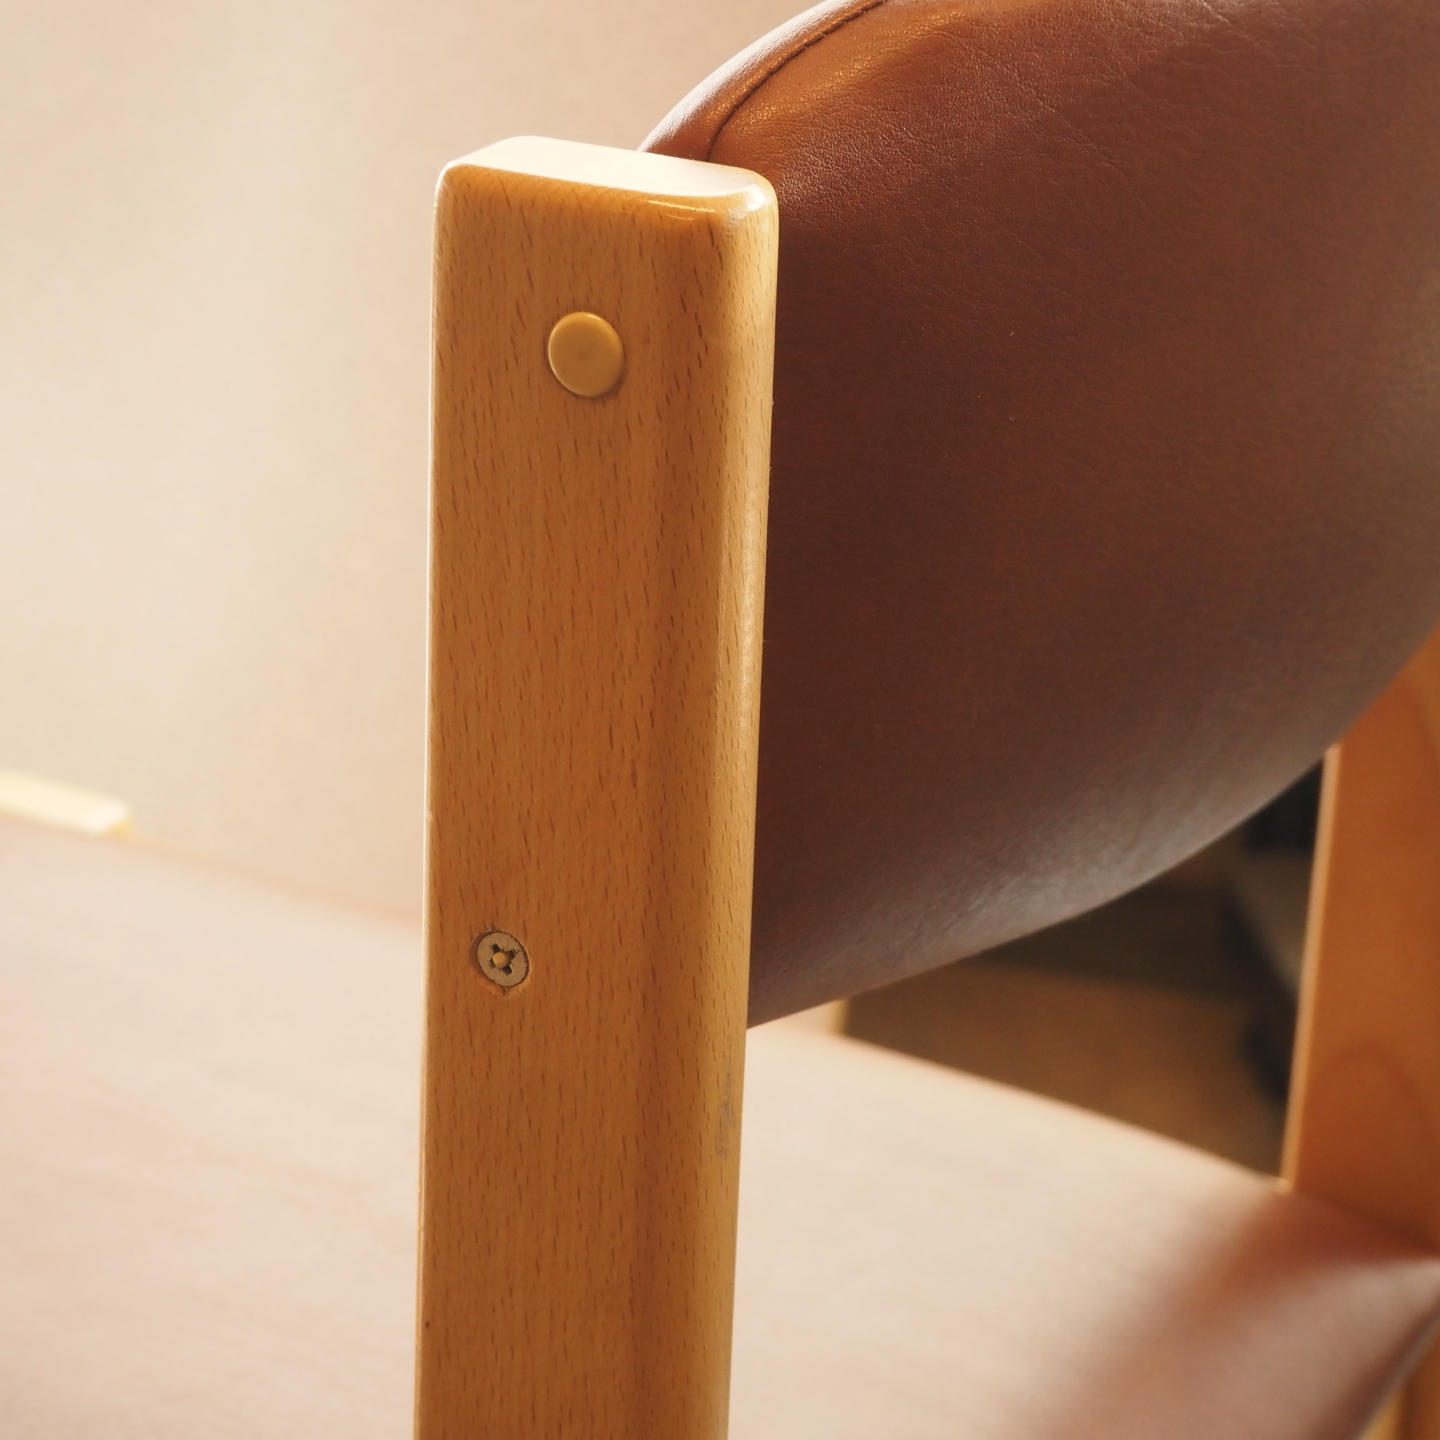 Chair in beech and brown simili leather